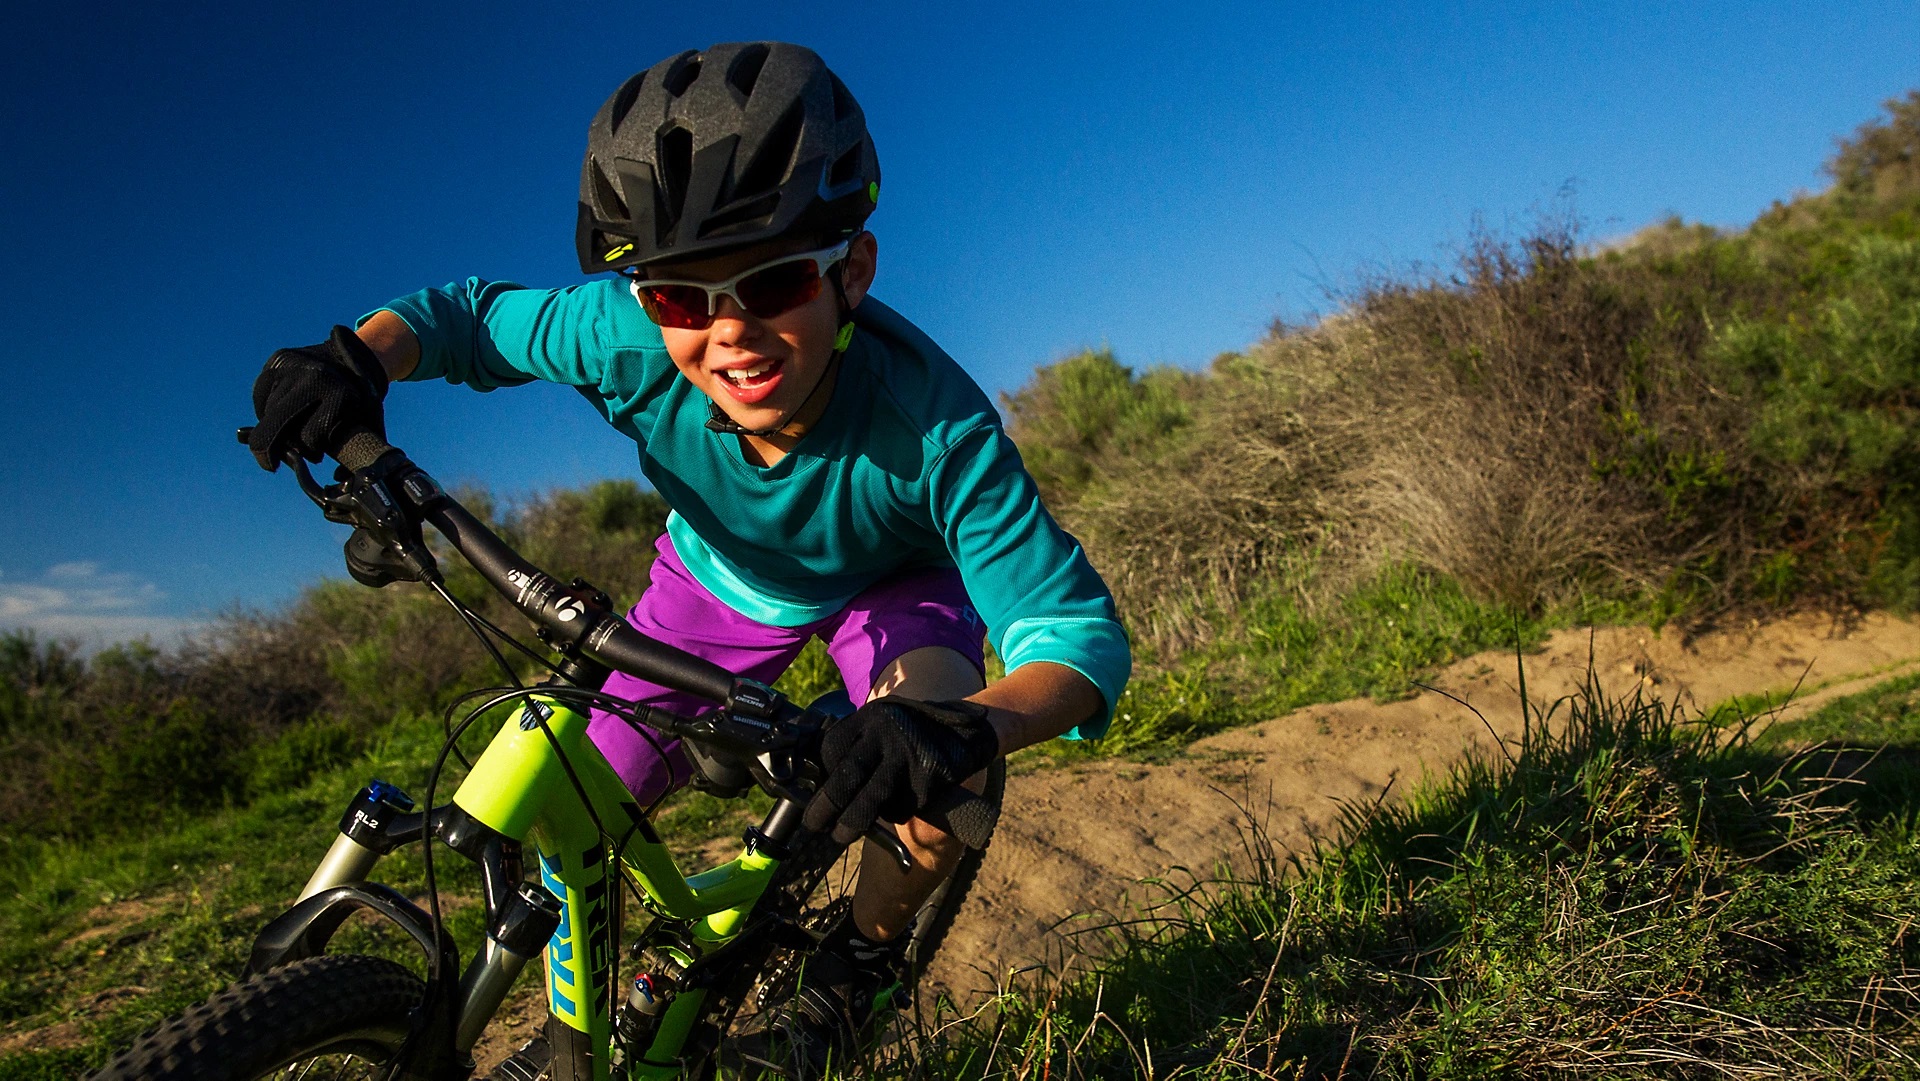 Happy child taking Trek mountain bike down off-road trail during day time